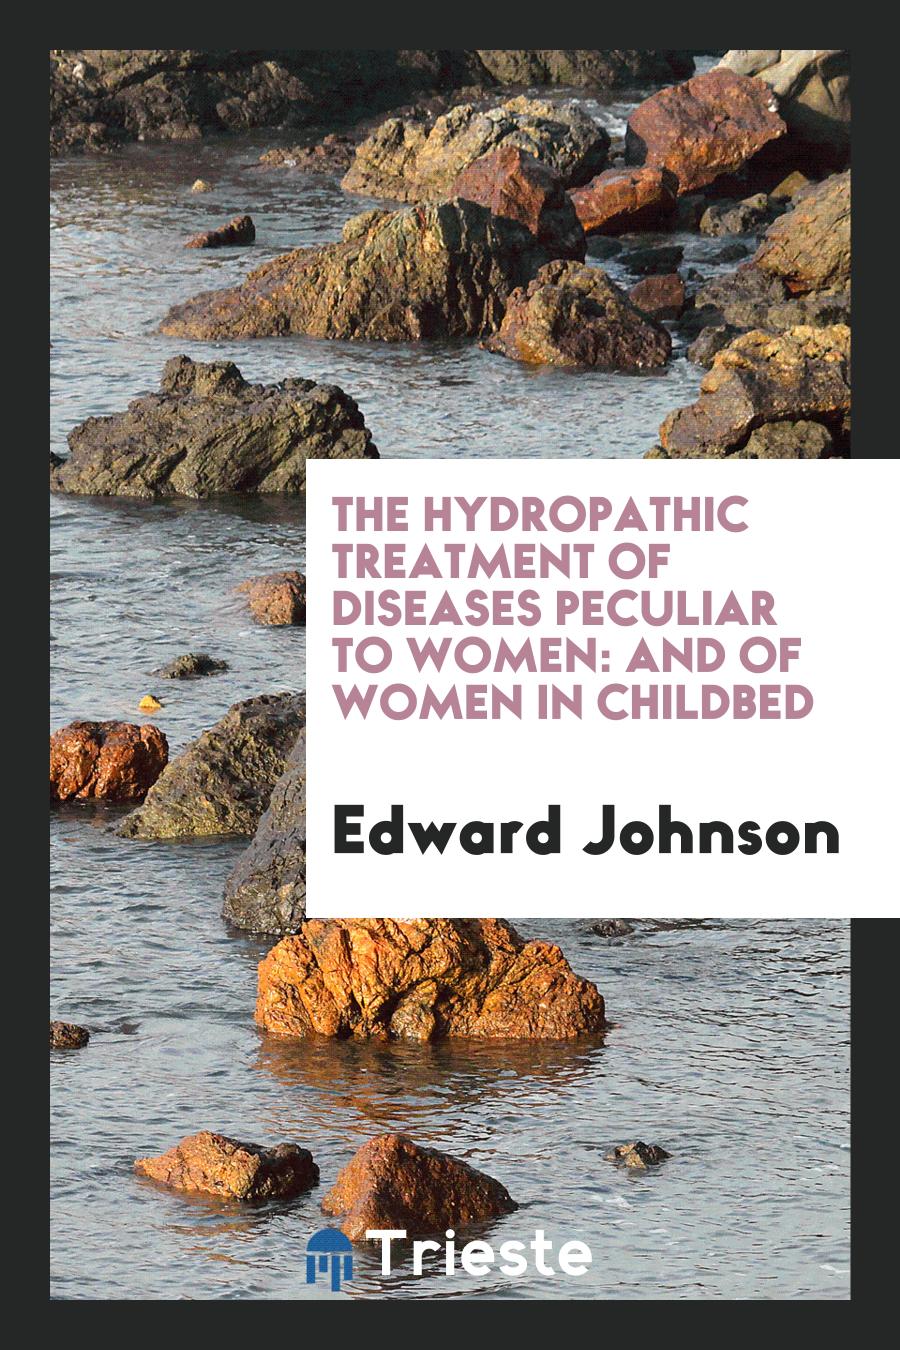 The Hydropathic Treatment of Diseases Peculiar to Women: And of Women in Childbed